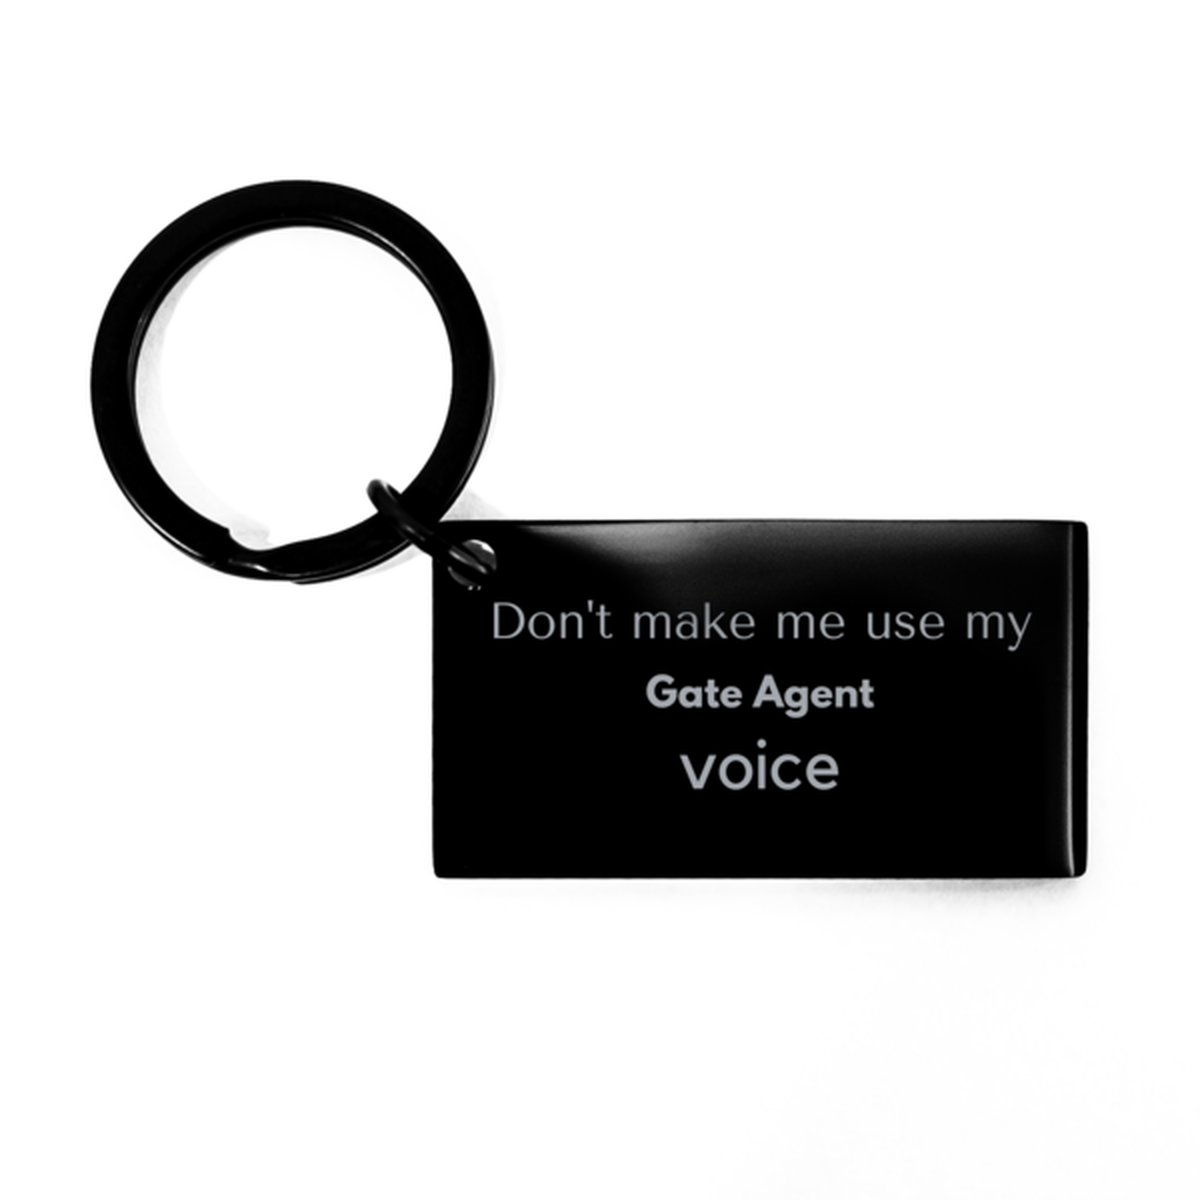 Don't make me use my Gate Agent voice, Sarcasm Gate Agent Gifts, Christmas Gate Agent Keychain Birthday Unique Gifts For Gate Agent Coworkers, Men, Women, Colleague, Friends